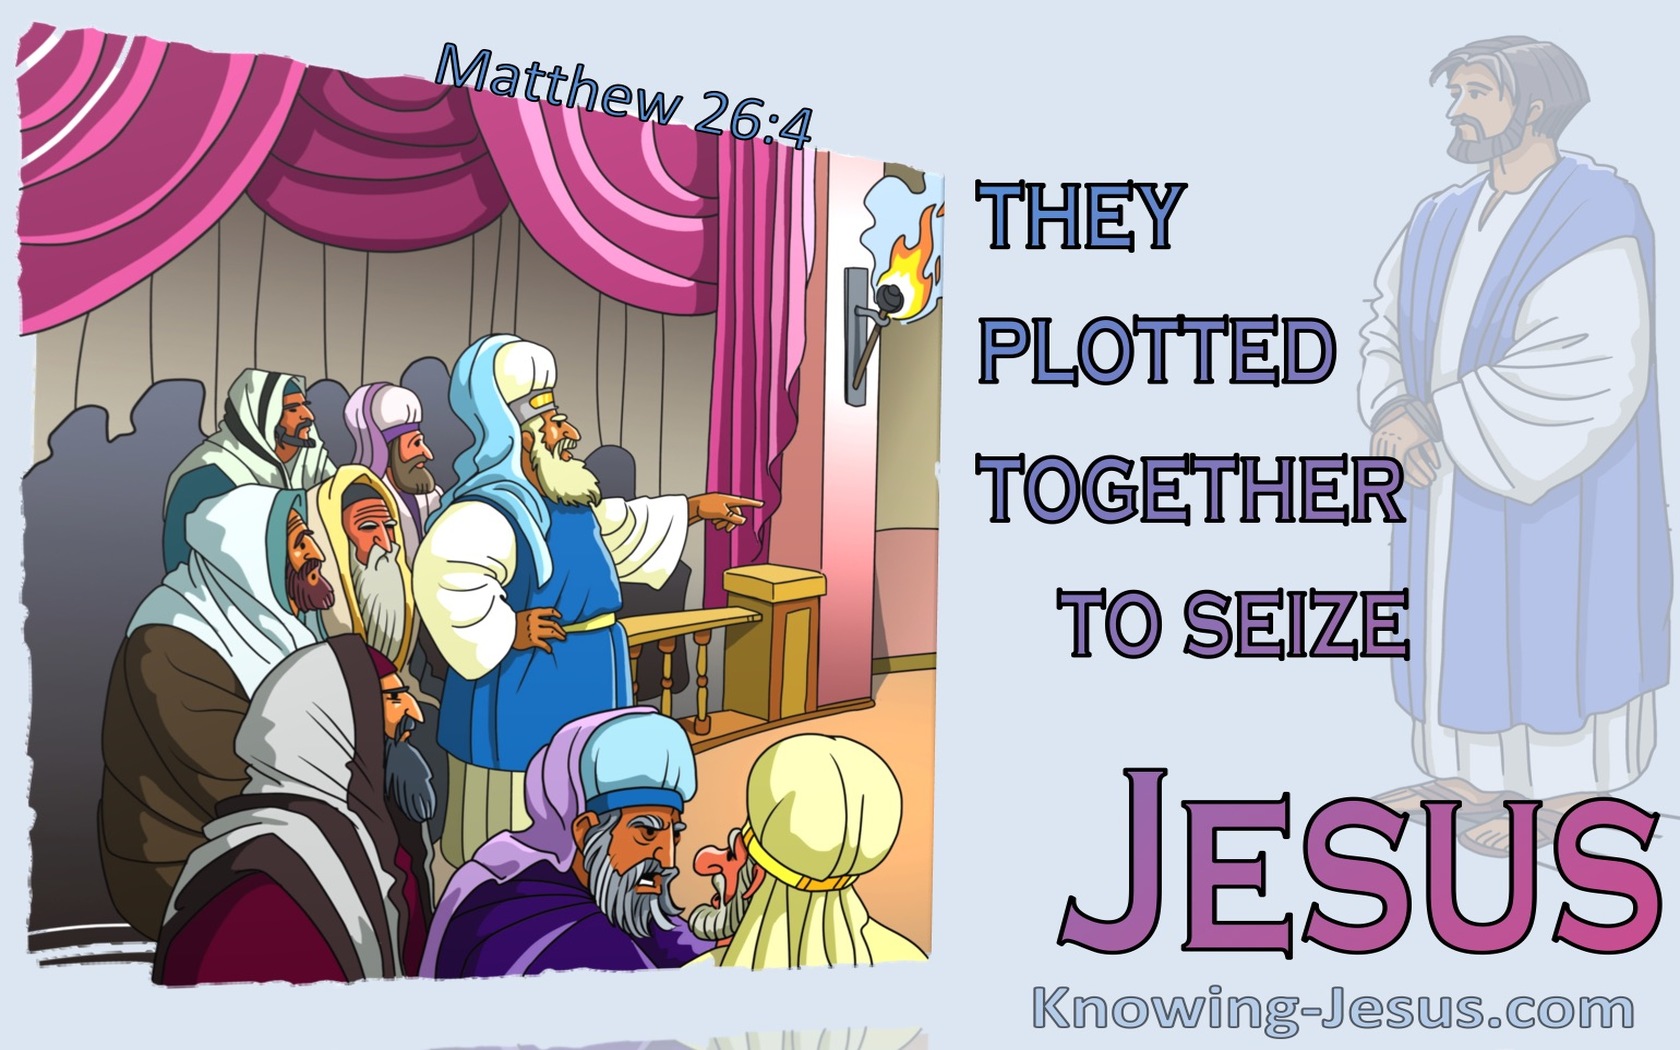 Matthew 26:4 They Plotted Together To Seize Jesus (pink)